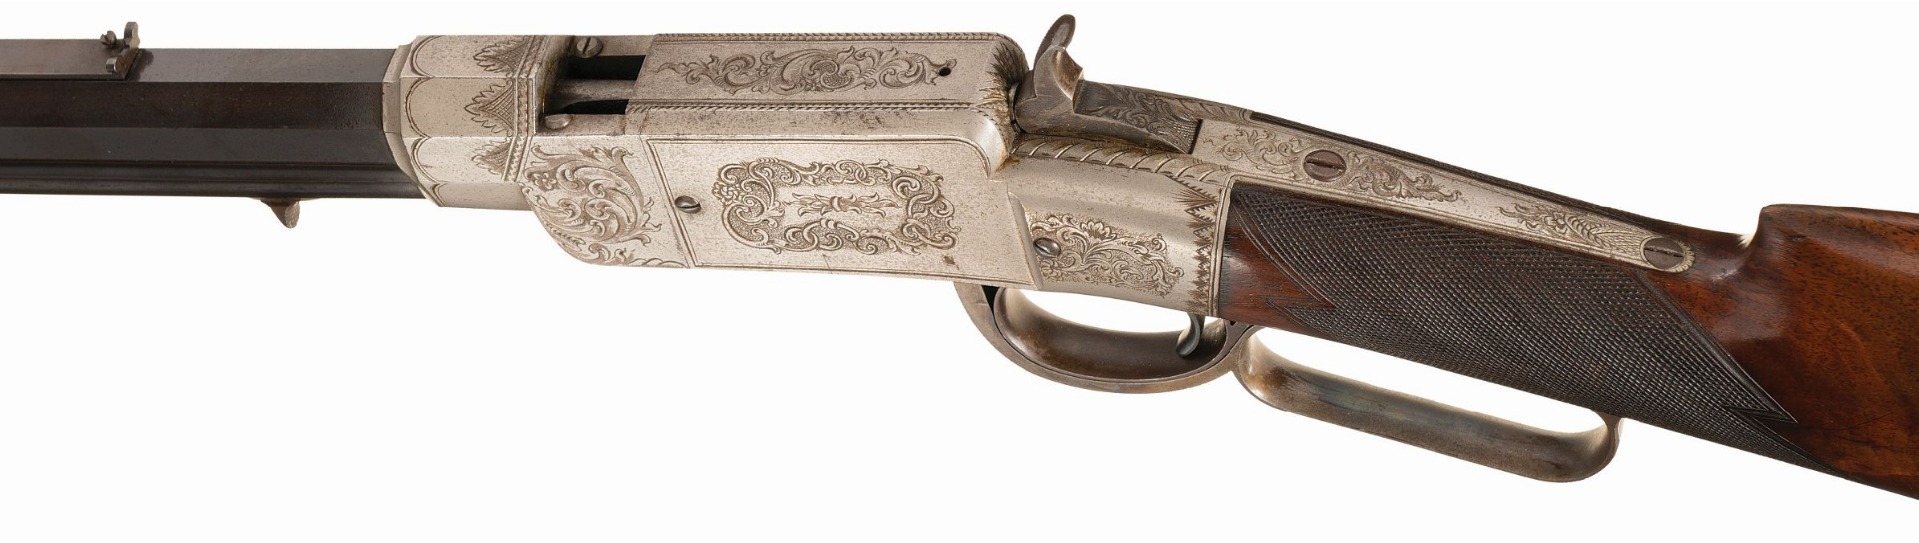 Smith & Wesson Prototype Lever Action Carbine